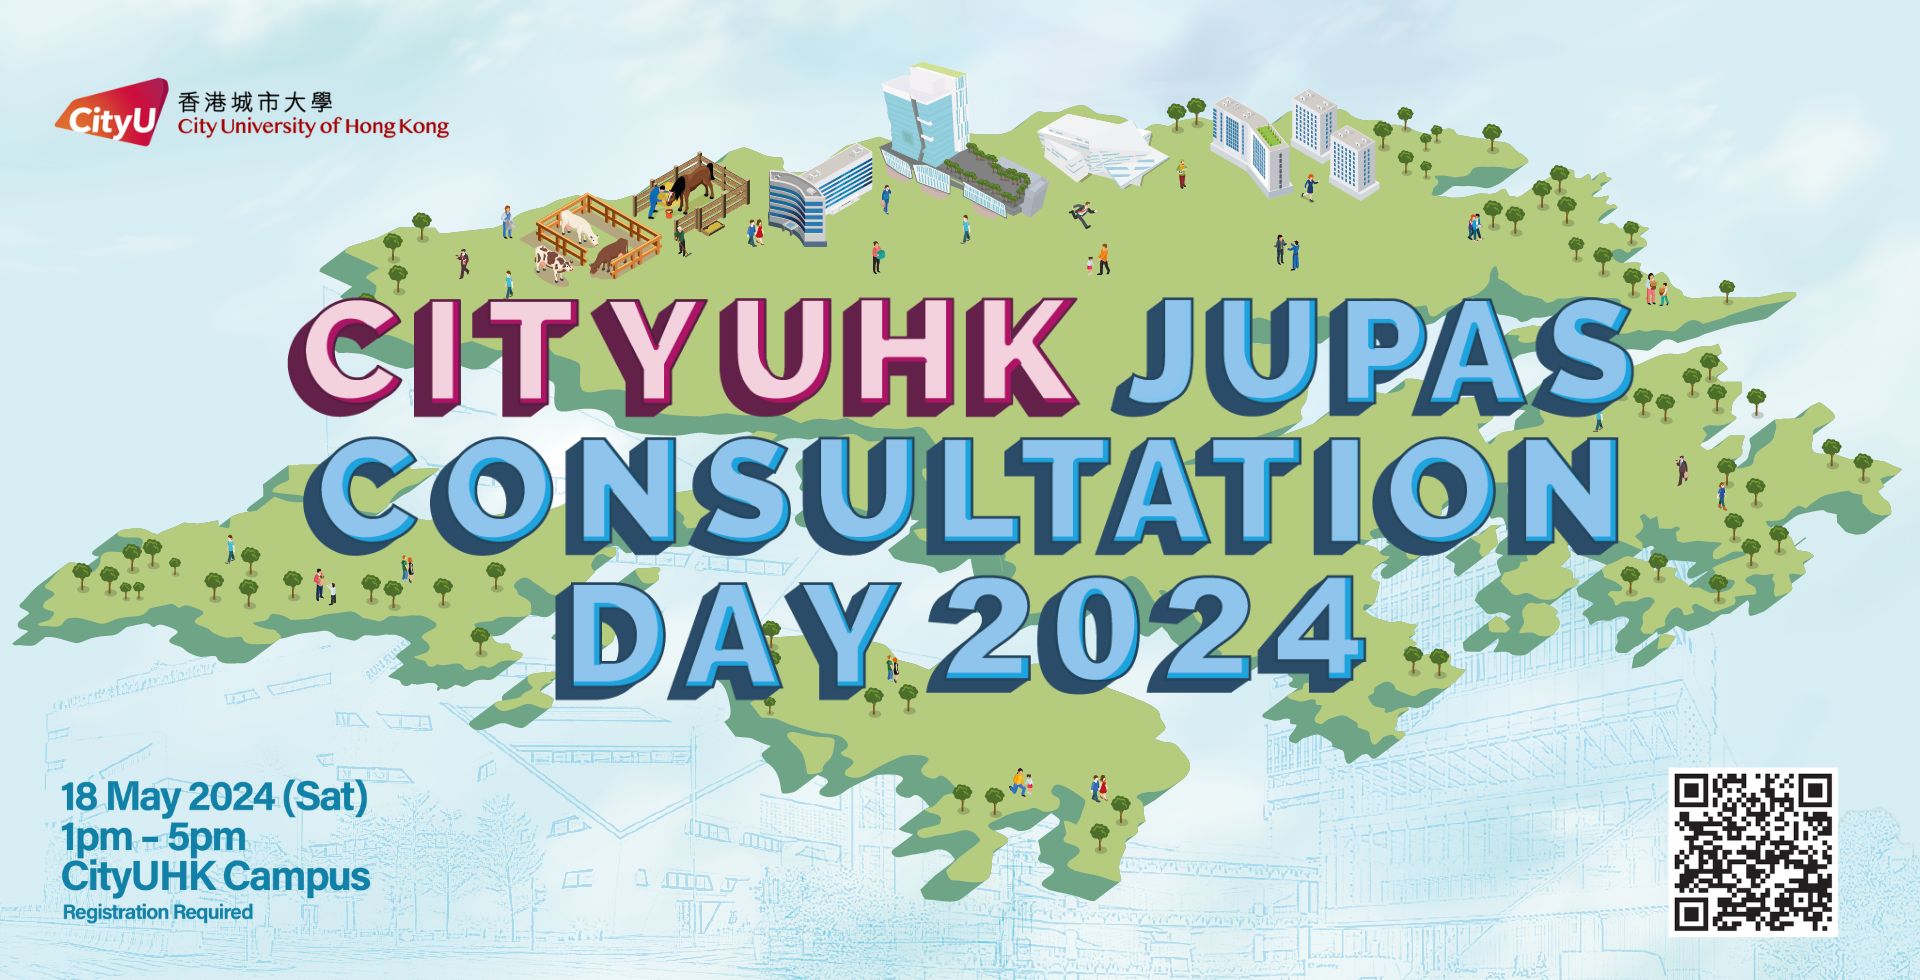 “CityUHK JUPAS Consultation Day 2024” will be held on Saturday, 18 May 2024 from 1pm to 5pm. This is a unique opportunity for JUPAS applicants to learn more about JUPAS admission strategies and CityUHK programmes before reprioritizing programme choices. Please share this message with your relatives, friends and other JUPAS applicants. Details are available at the event website. Registration is required.